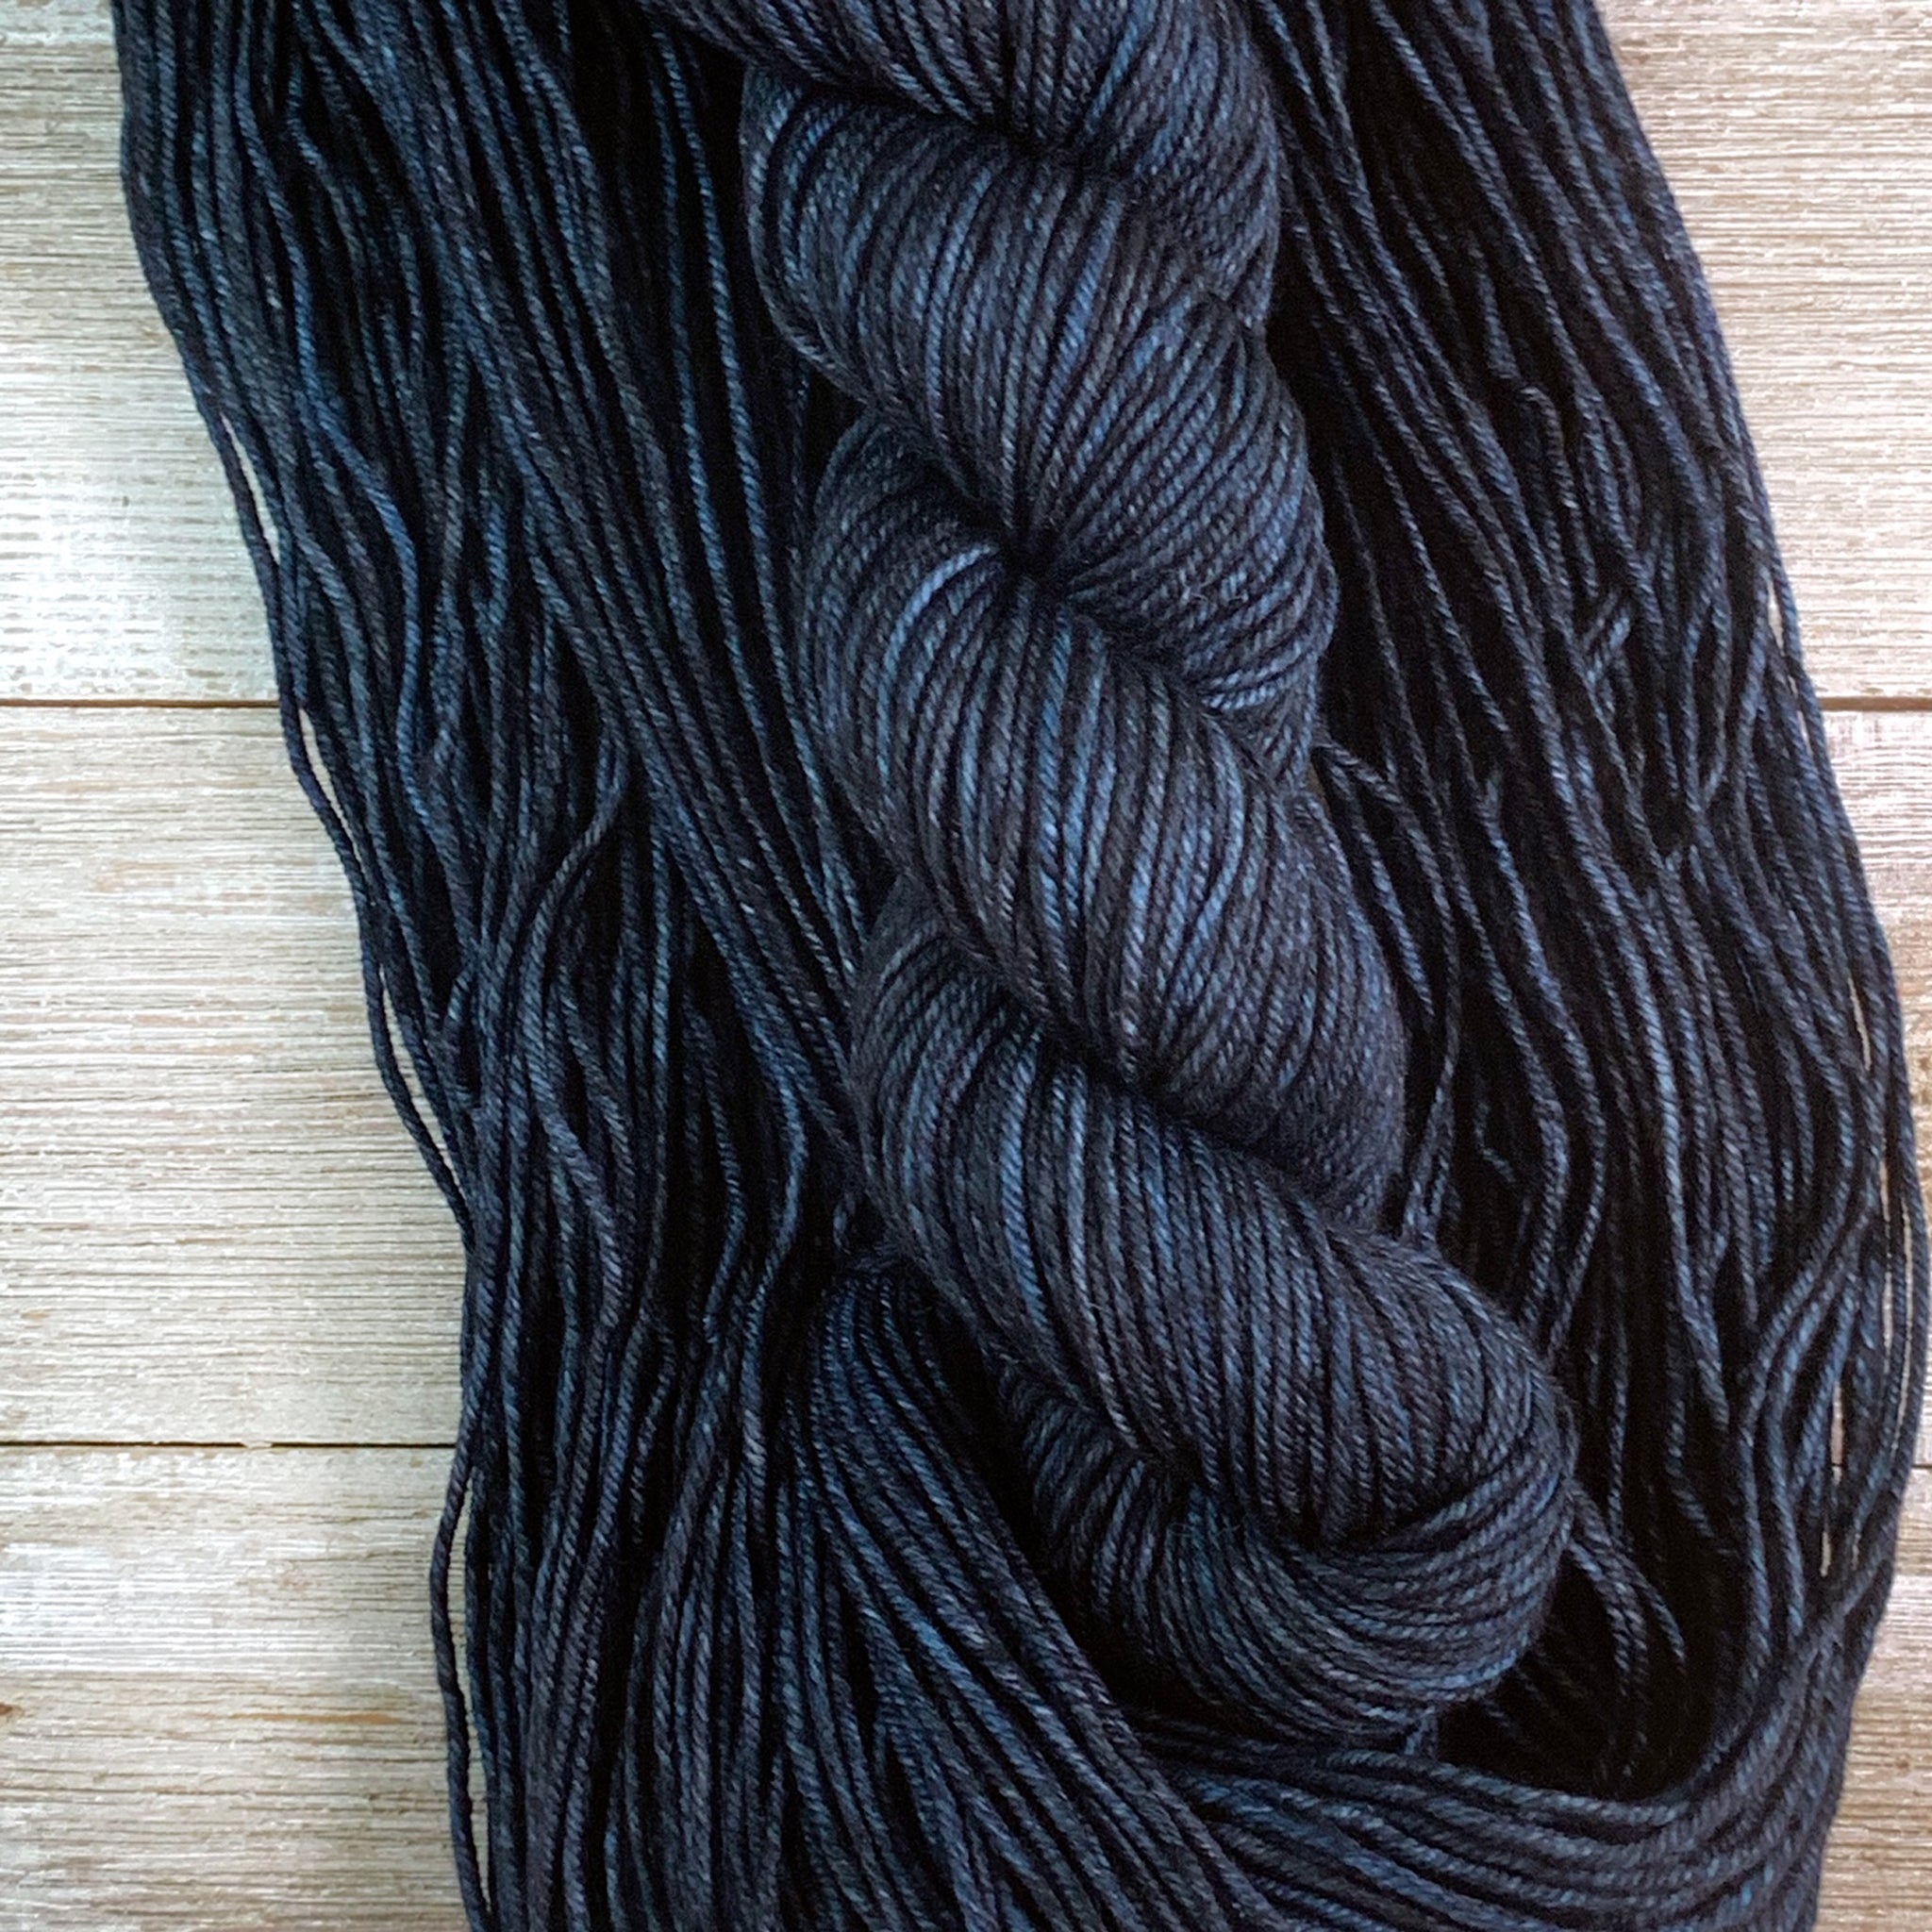 ww kashmir Forever In Blue Jeans, worsted weight merino and cashmere yarn